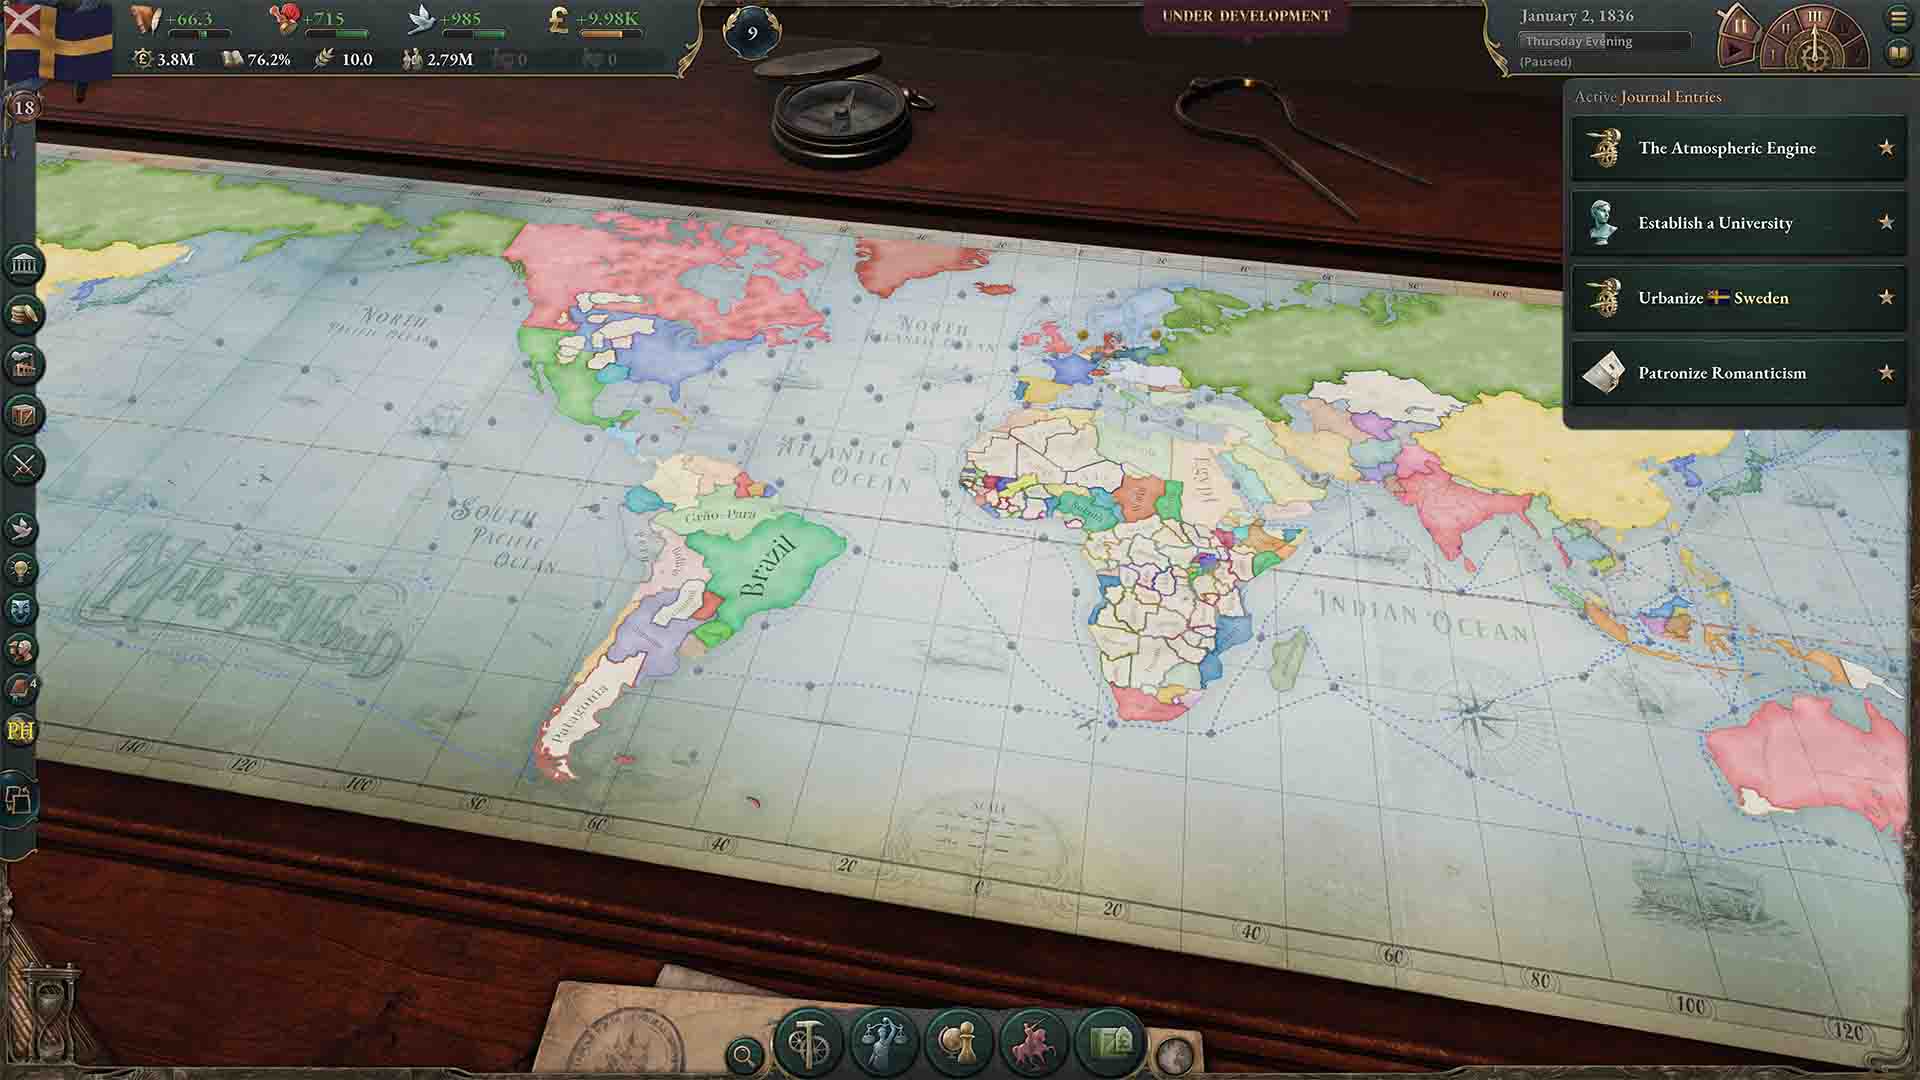 Victoria 3 release date confirmed for October exclusively on Steam  [Updated]